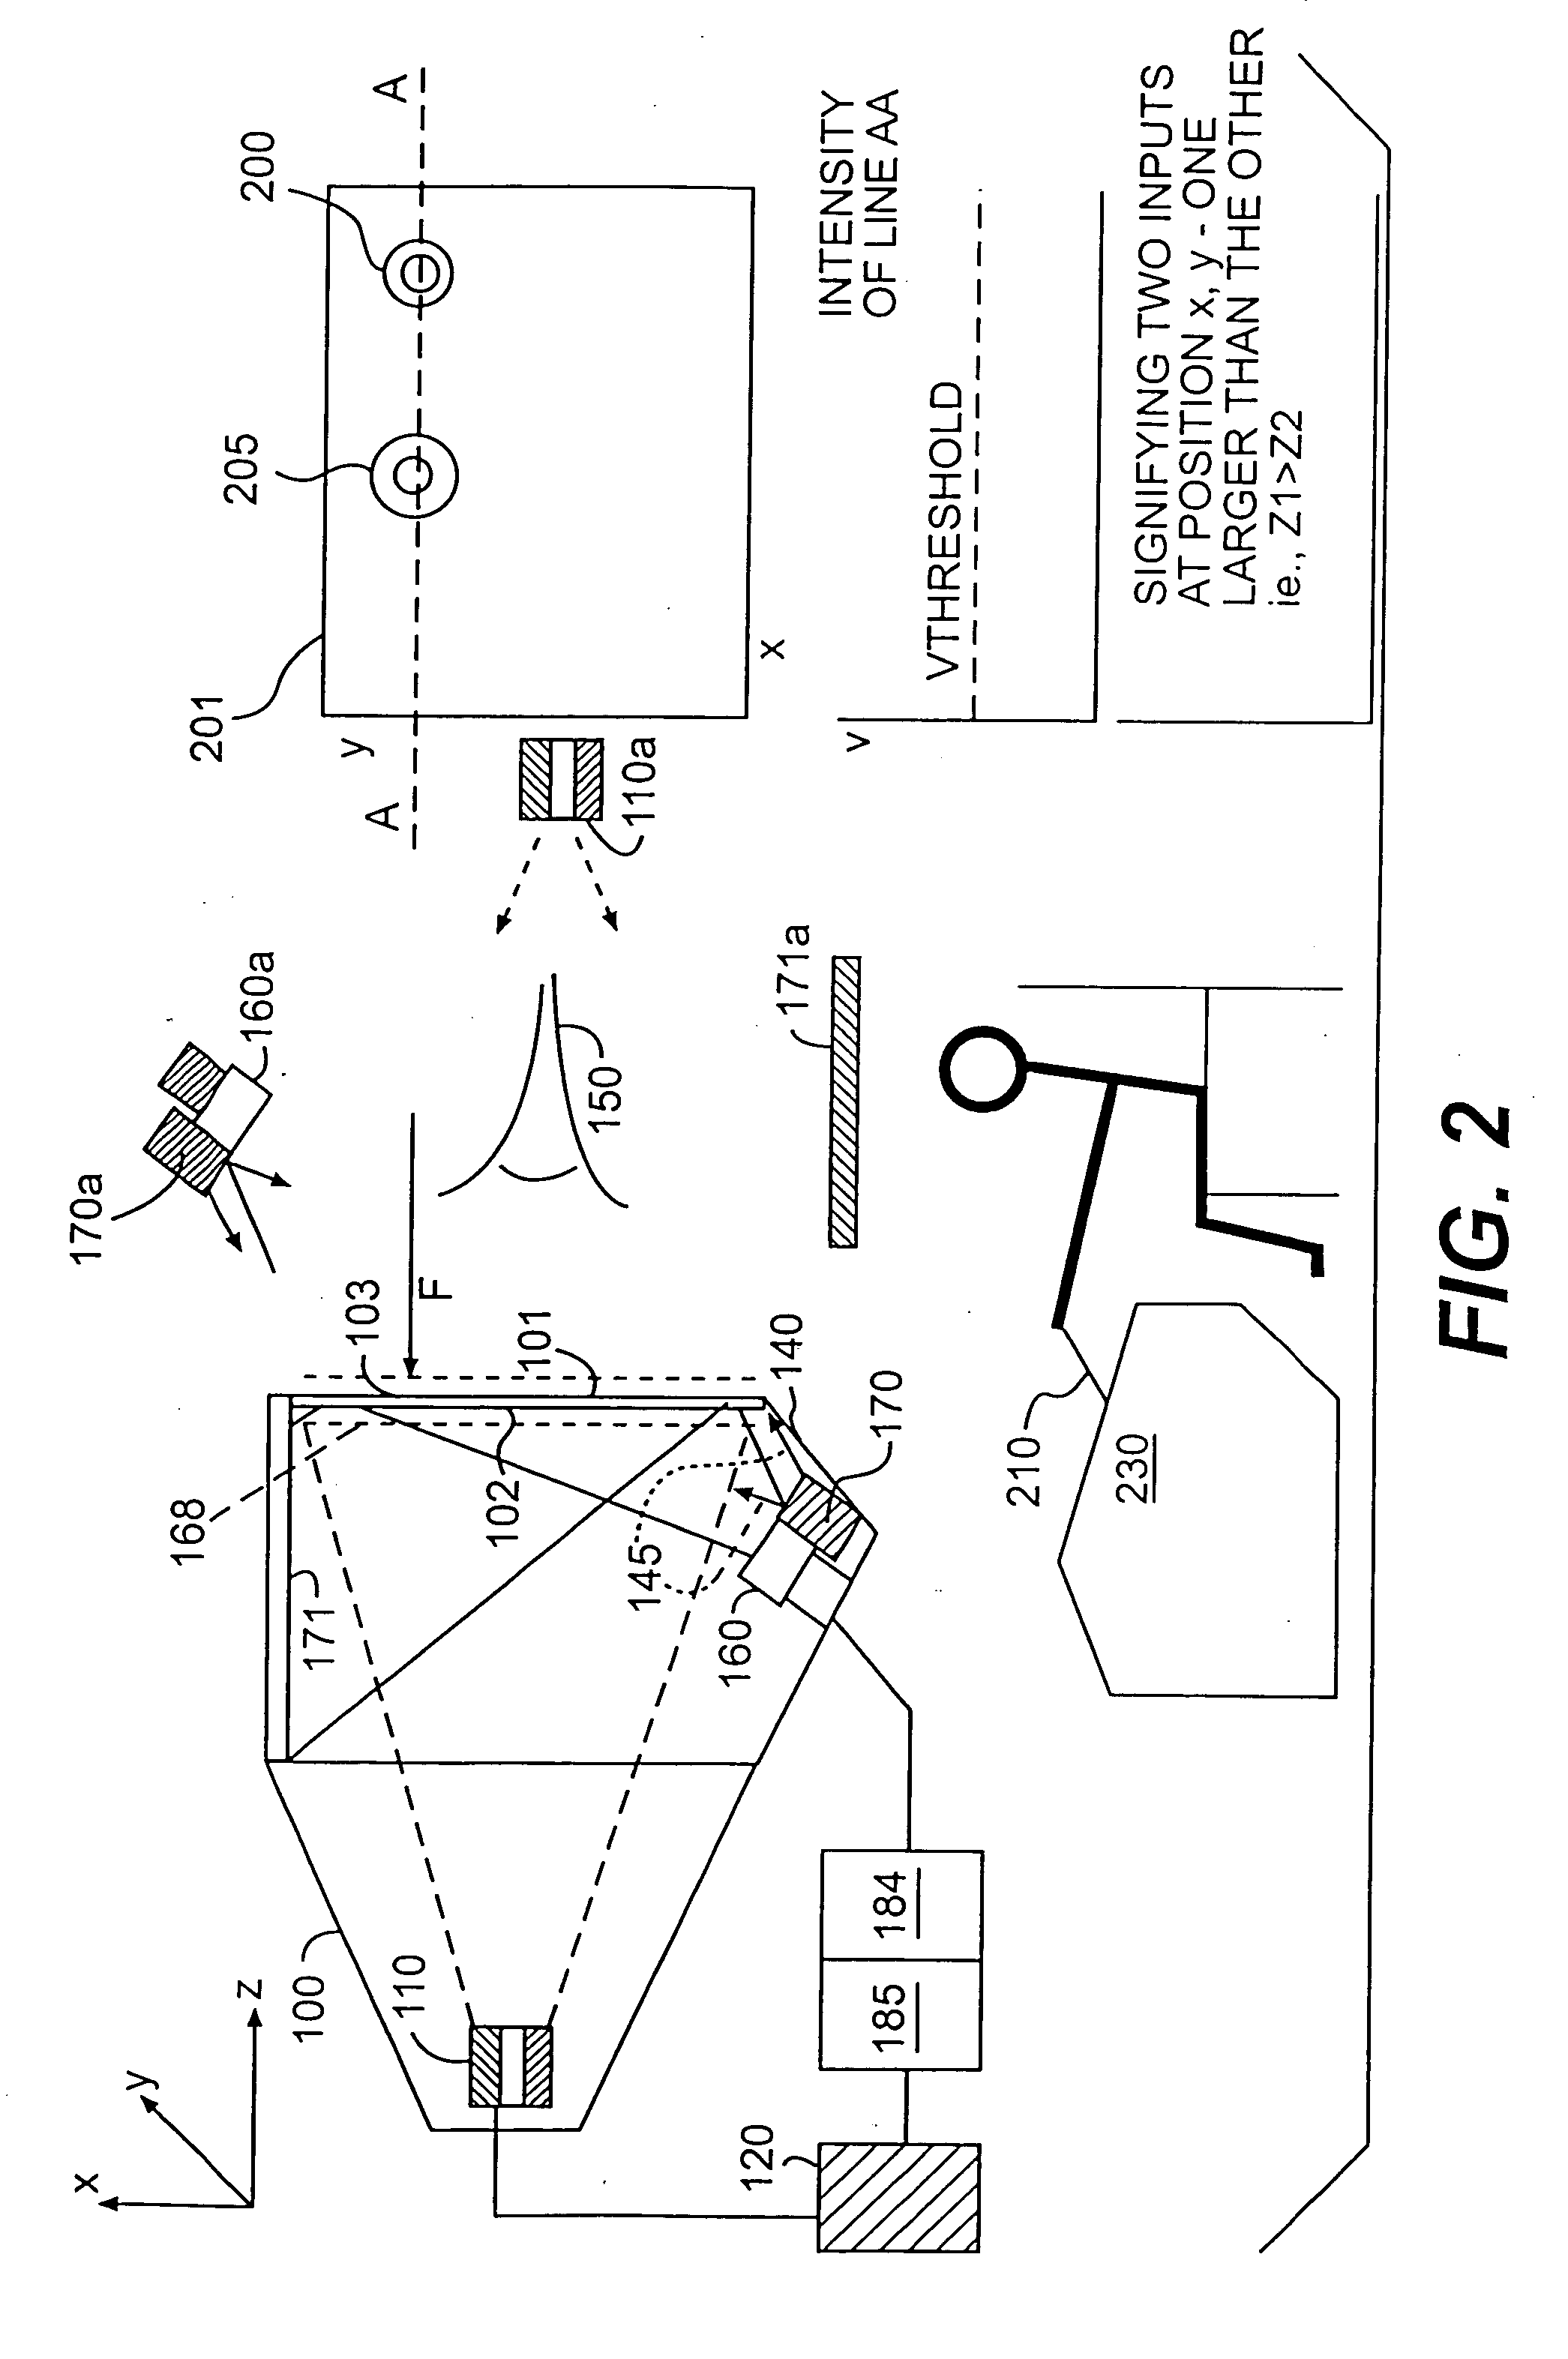 Method for providing human input to a computer